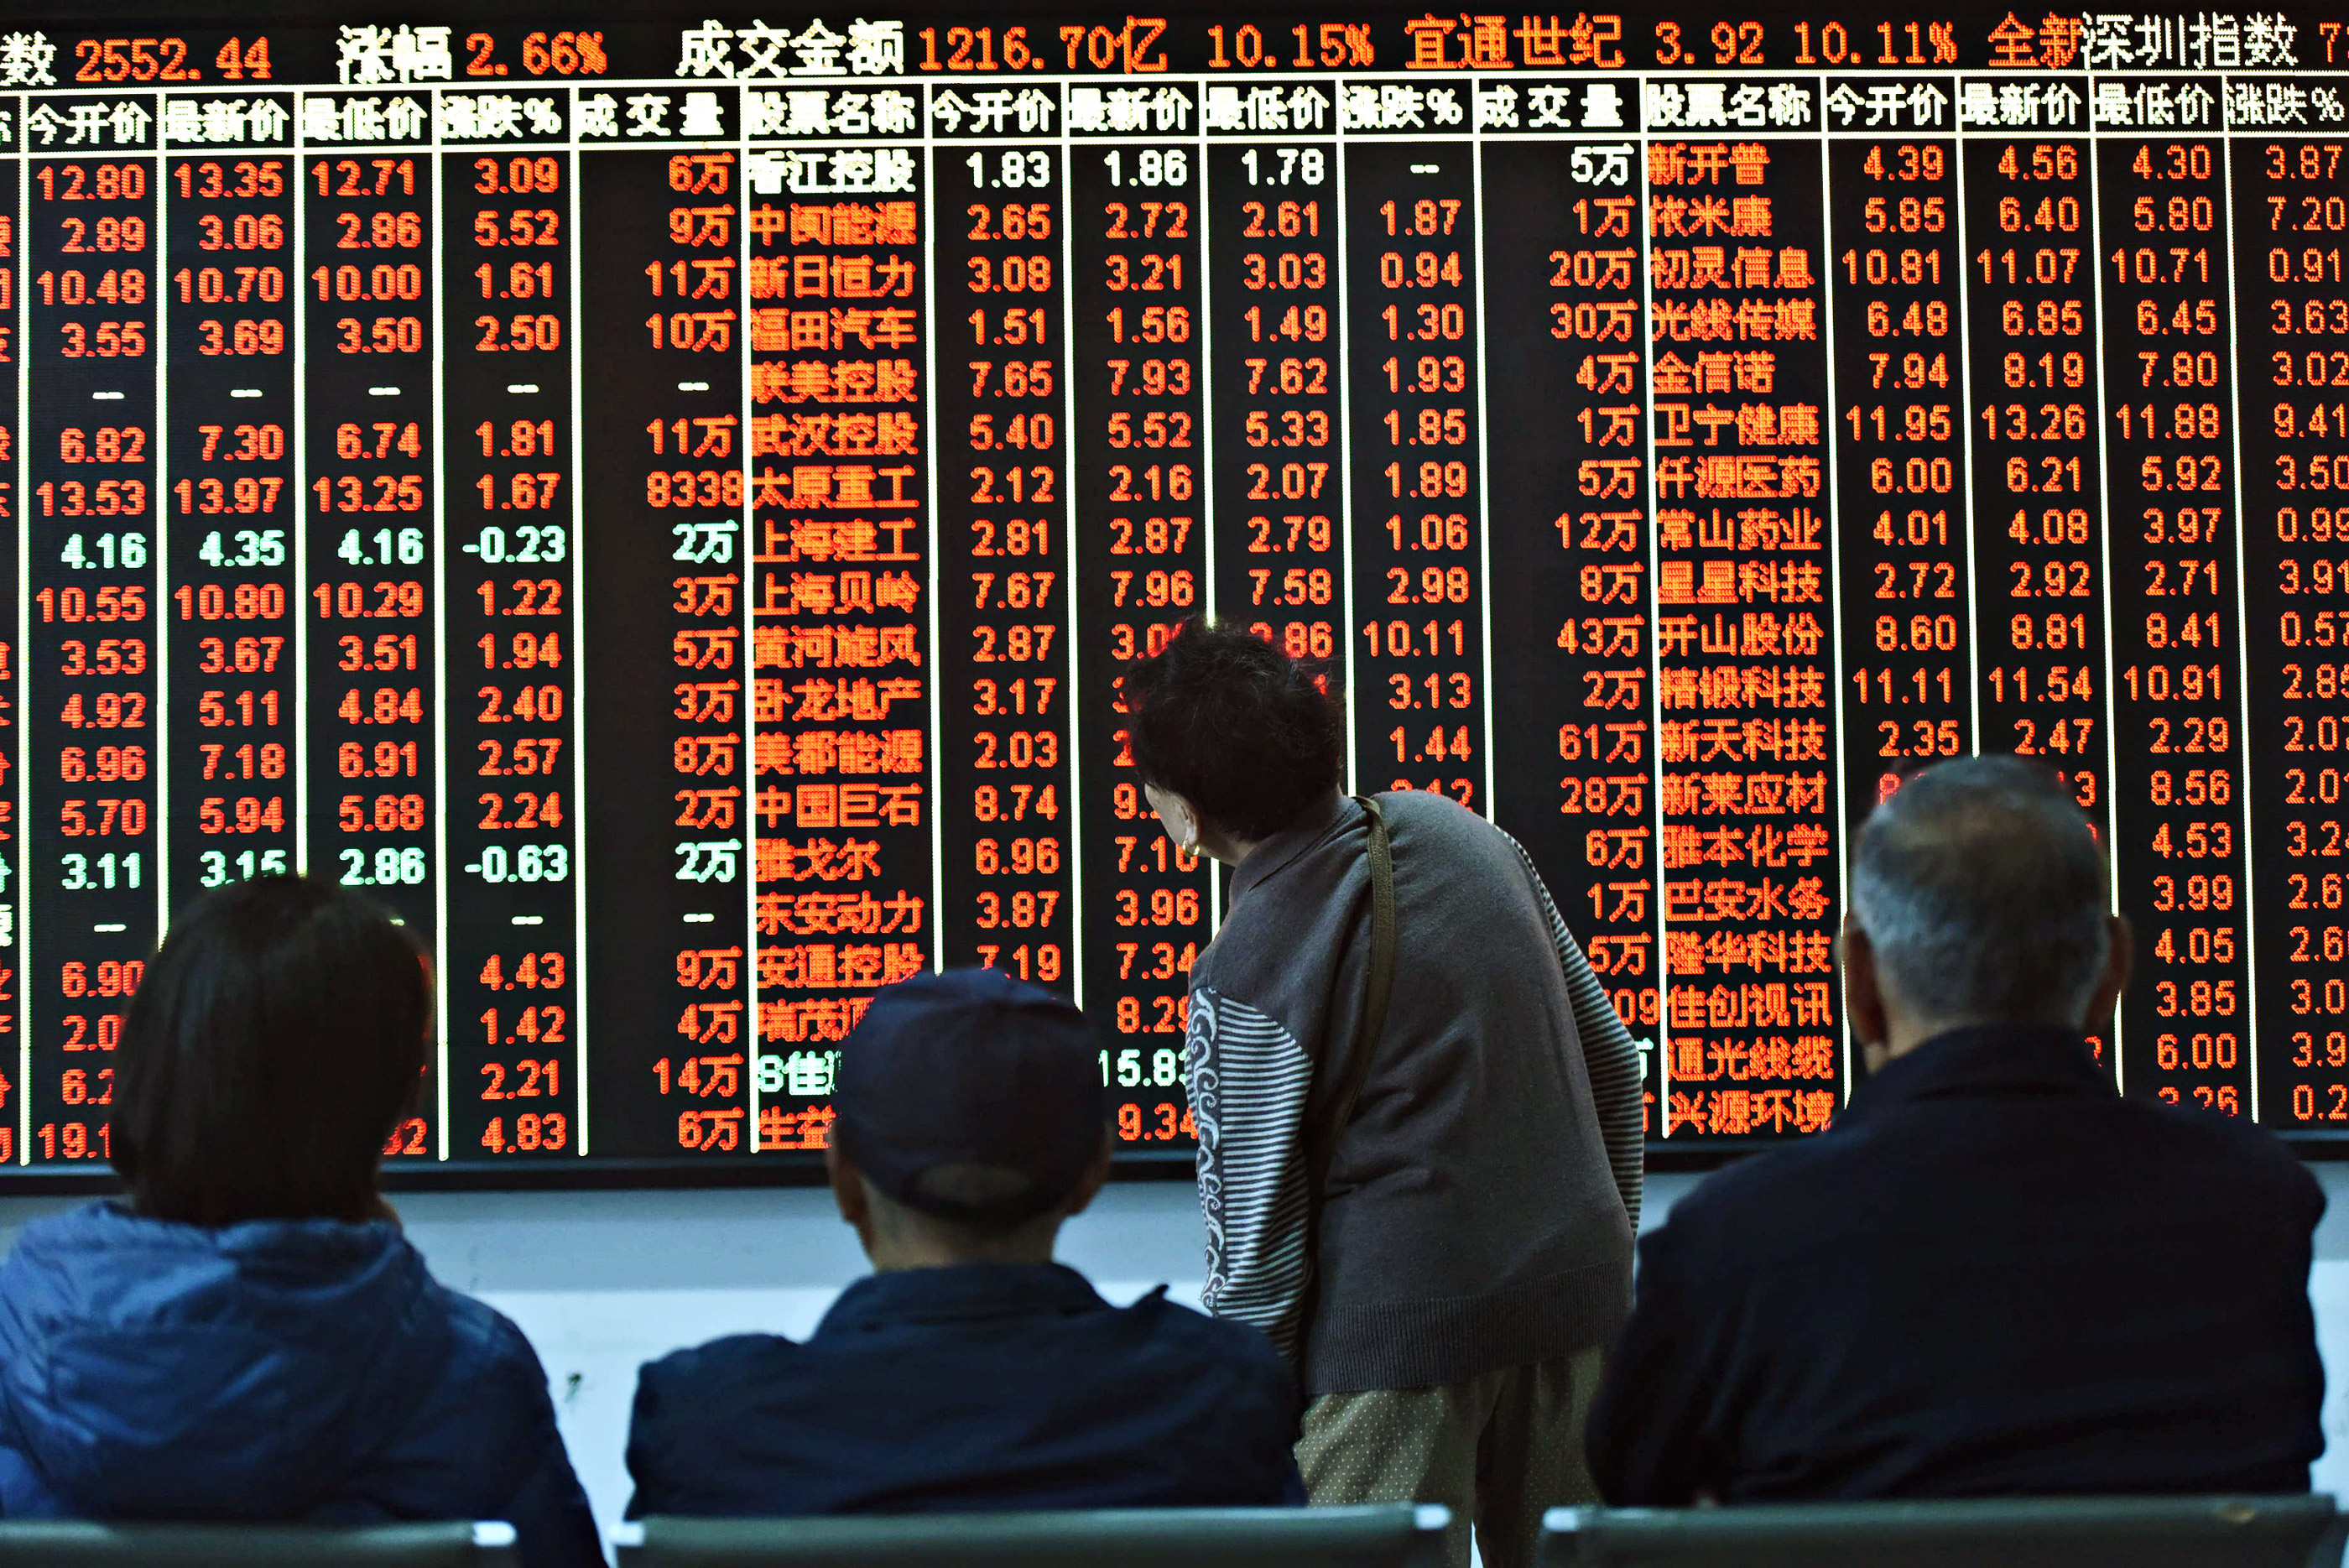 Investors watch the electronic board at a stock exchange hall on October 19, 2018 in Hangzhou, Zhejiang Province of China.